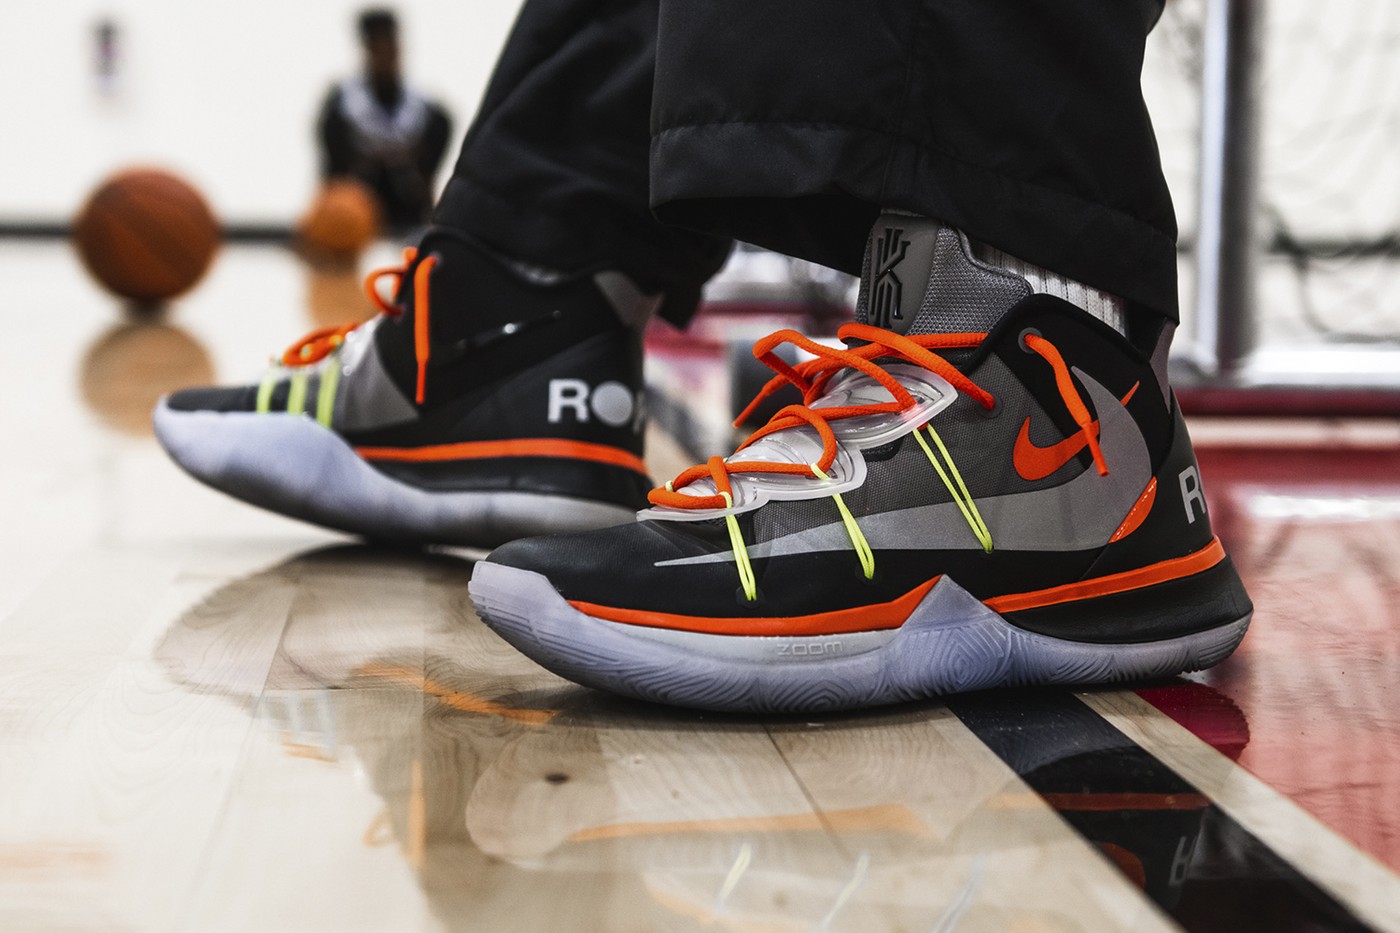 ROKIT x Nike 全新限量联名 Kyrie 5「Welcome Home」发布